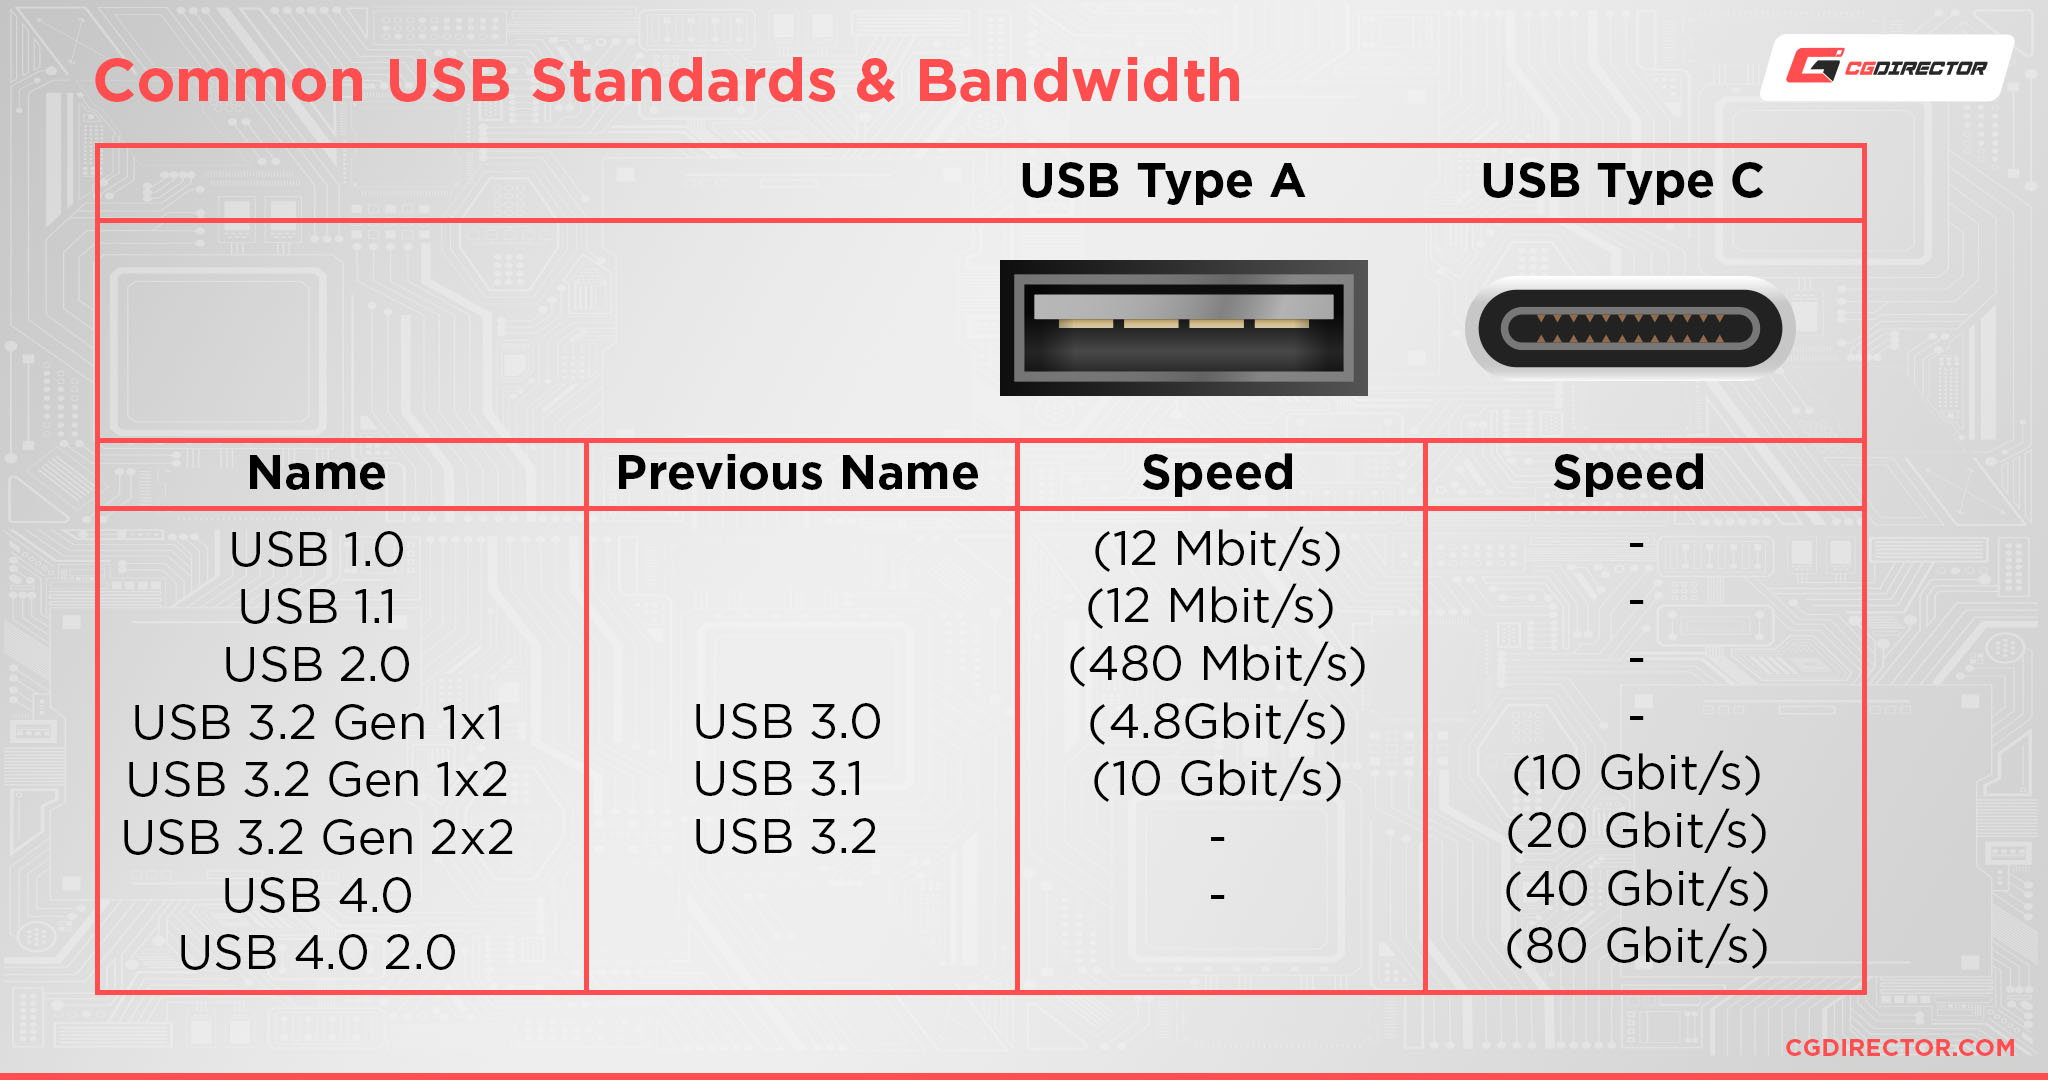 Common USB Standards, Bandwidth, and Power